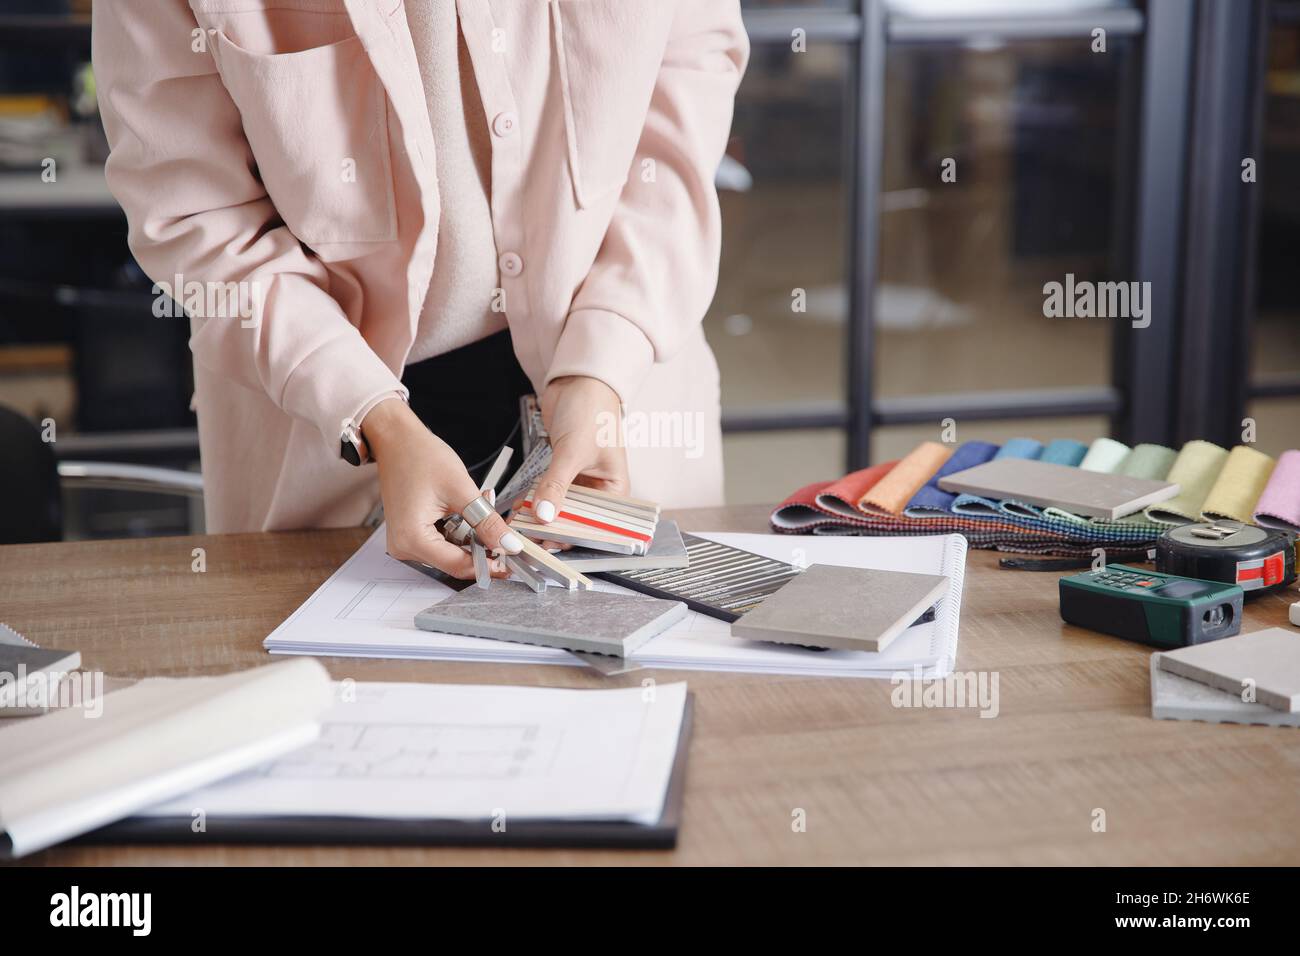 Woman interior designer chooses grout color for ceramic tiles. Stock Photo